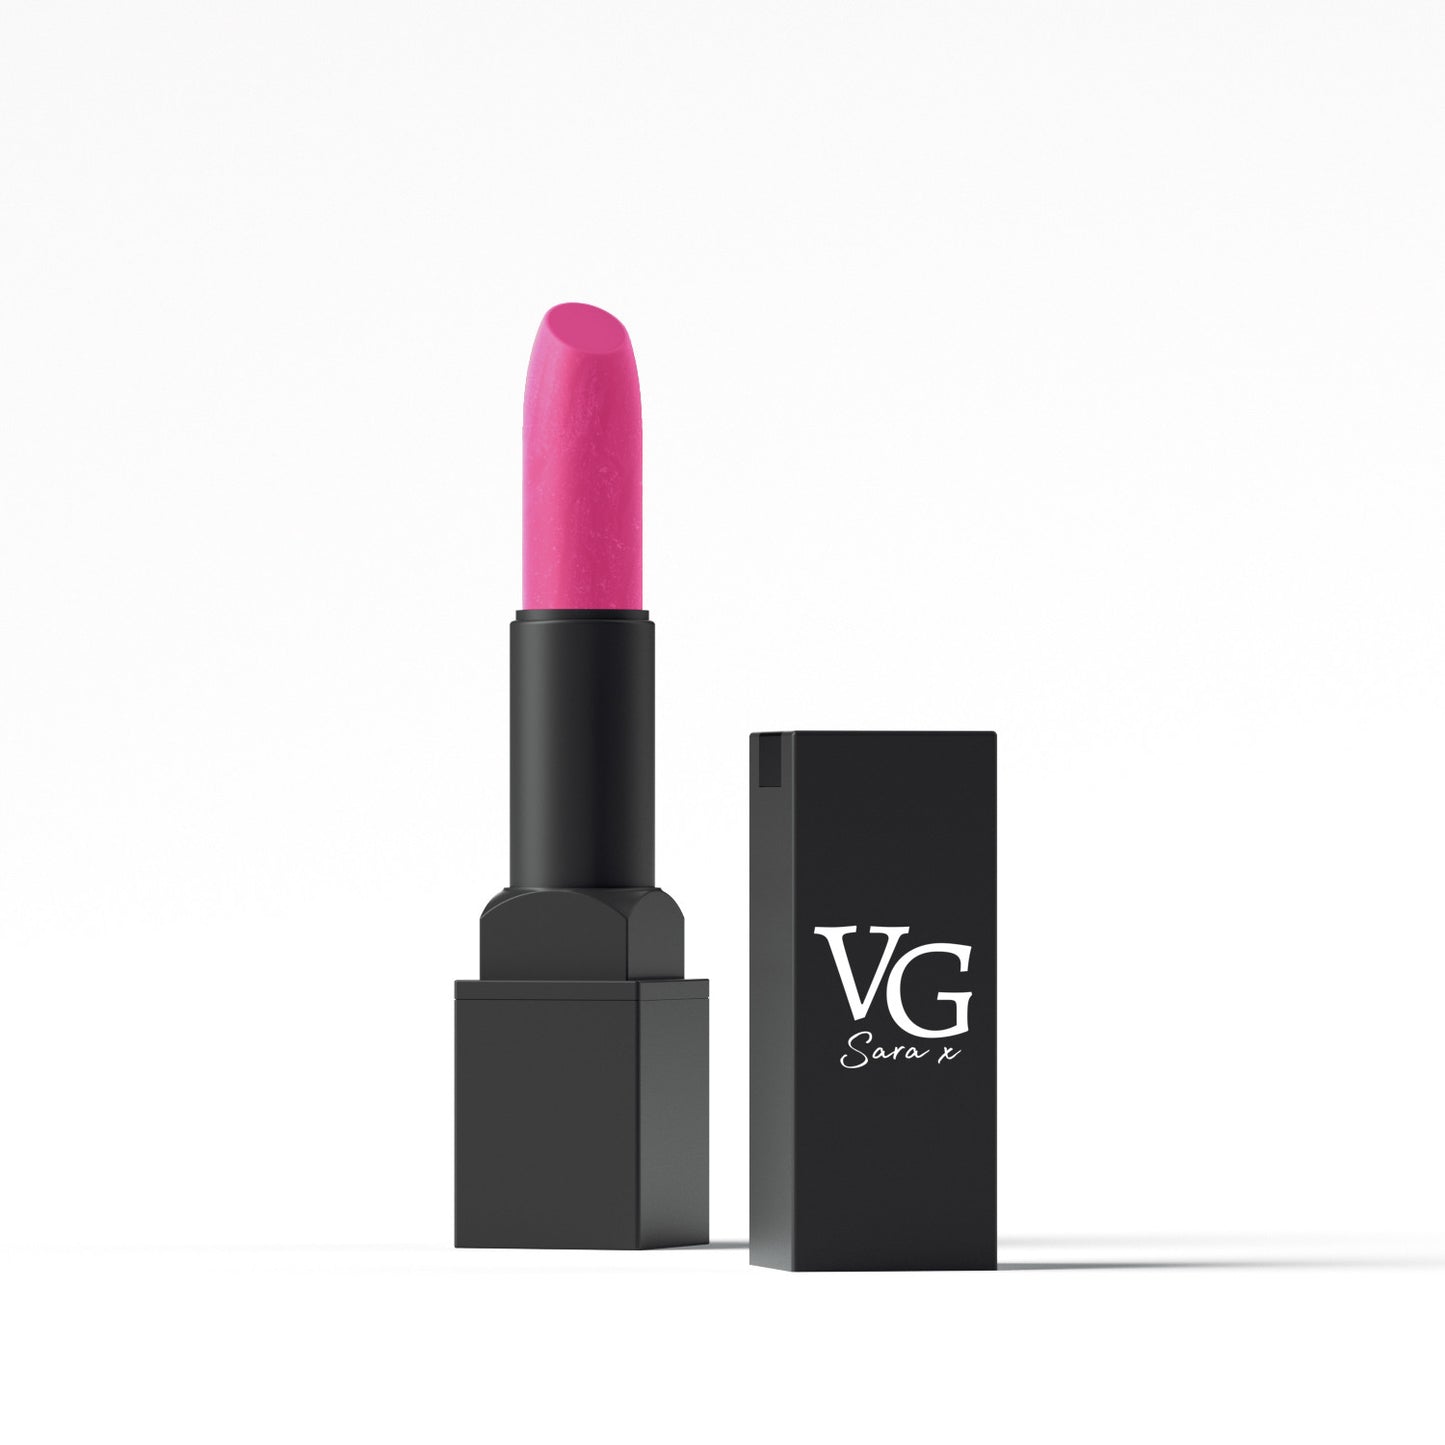 VG natural lipstick with long-wear feature displayed